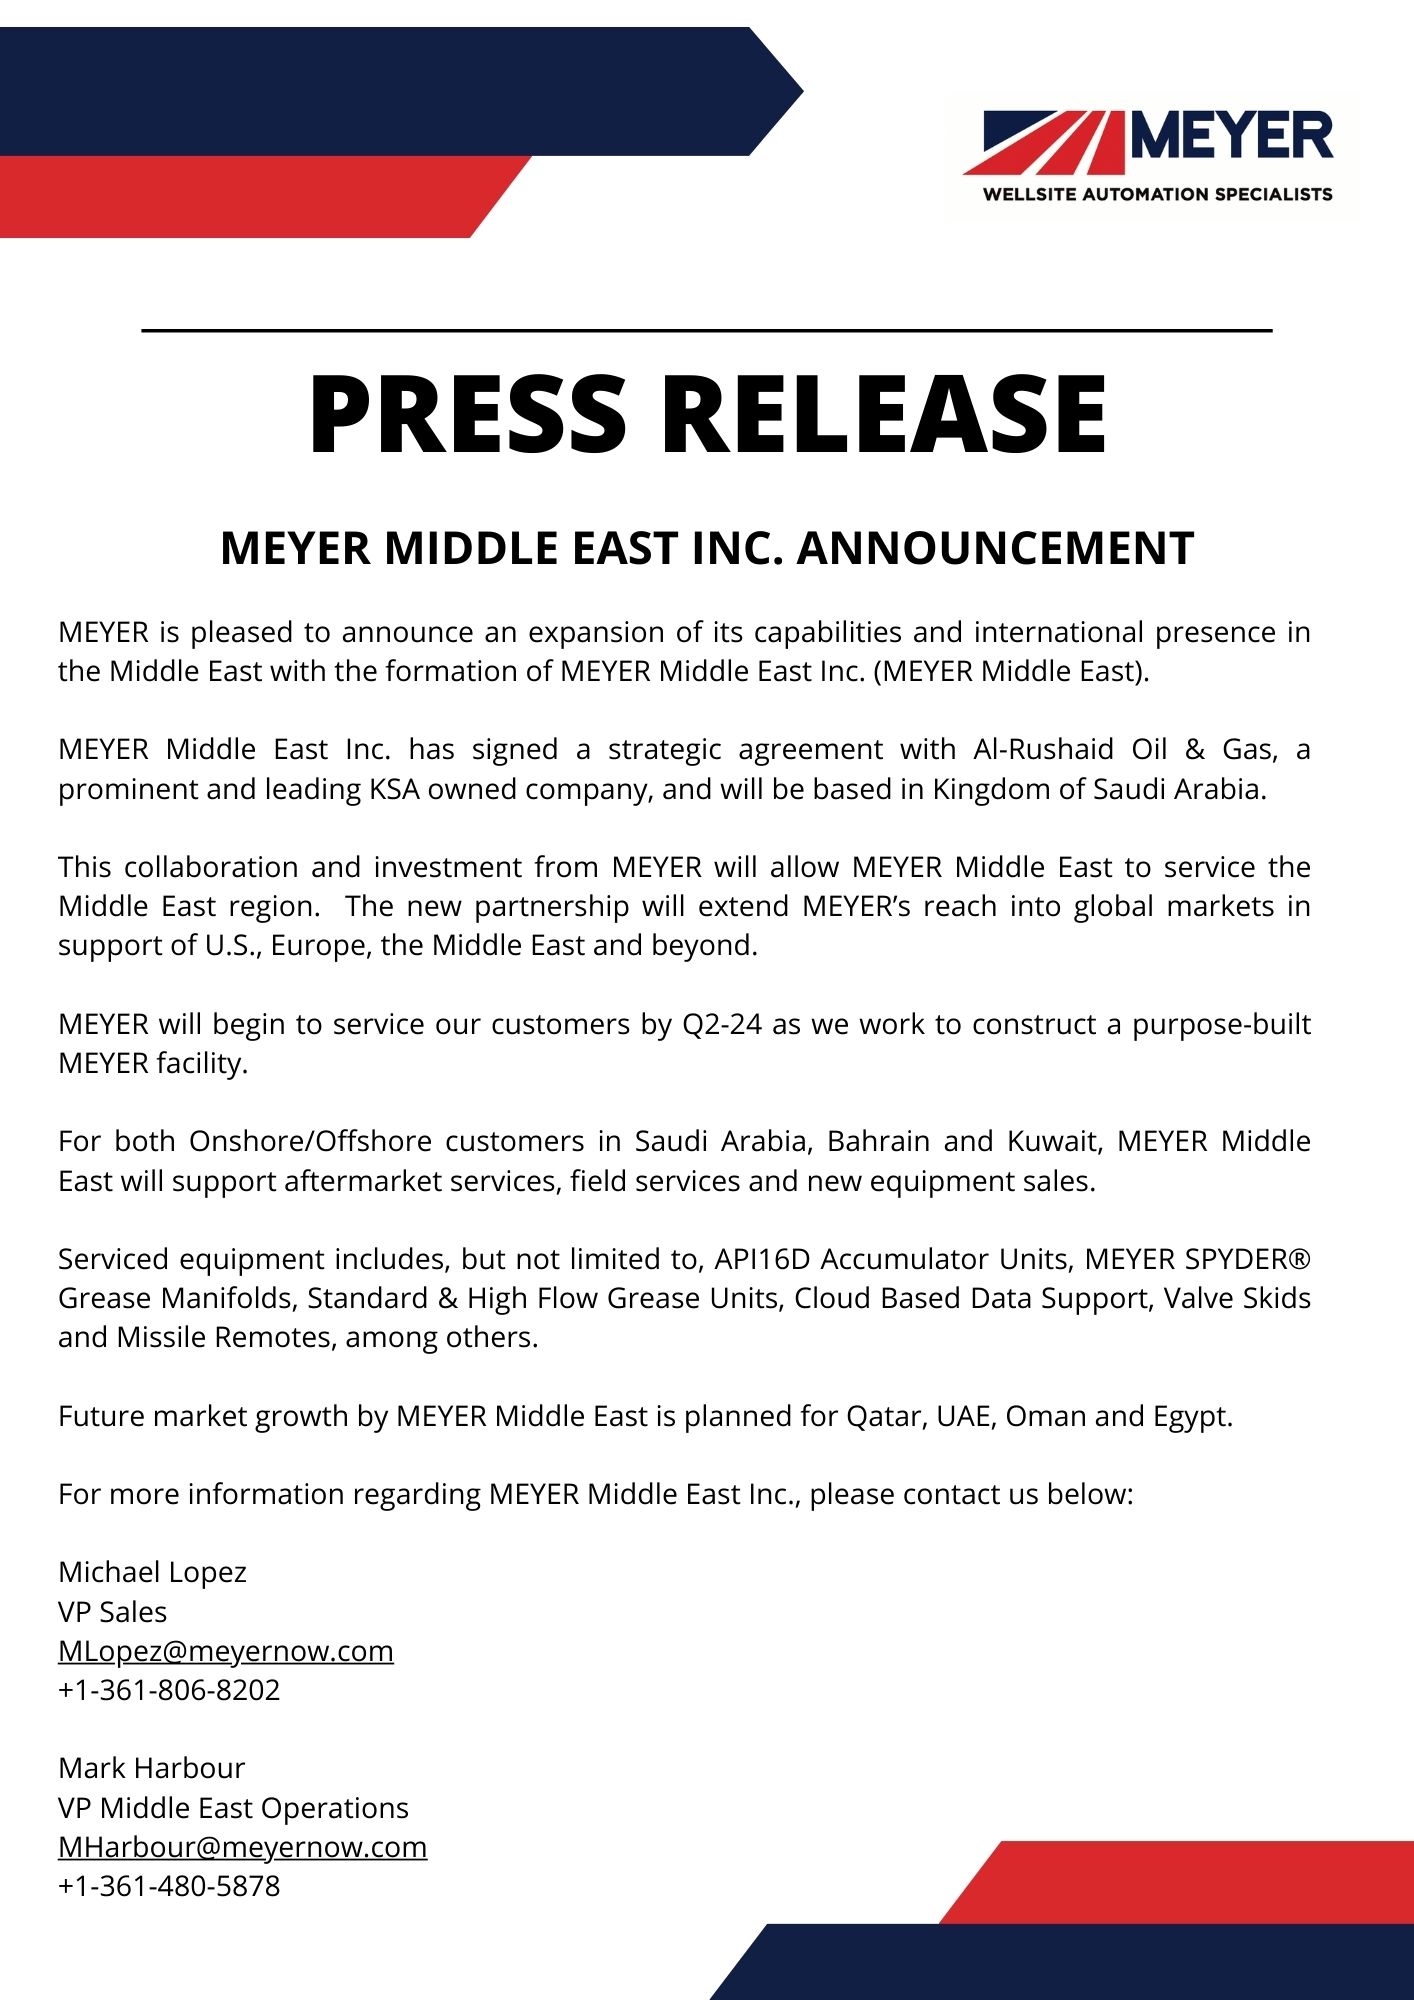 MEYER Middle East Press Release